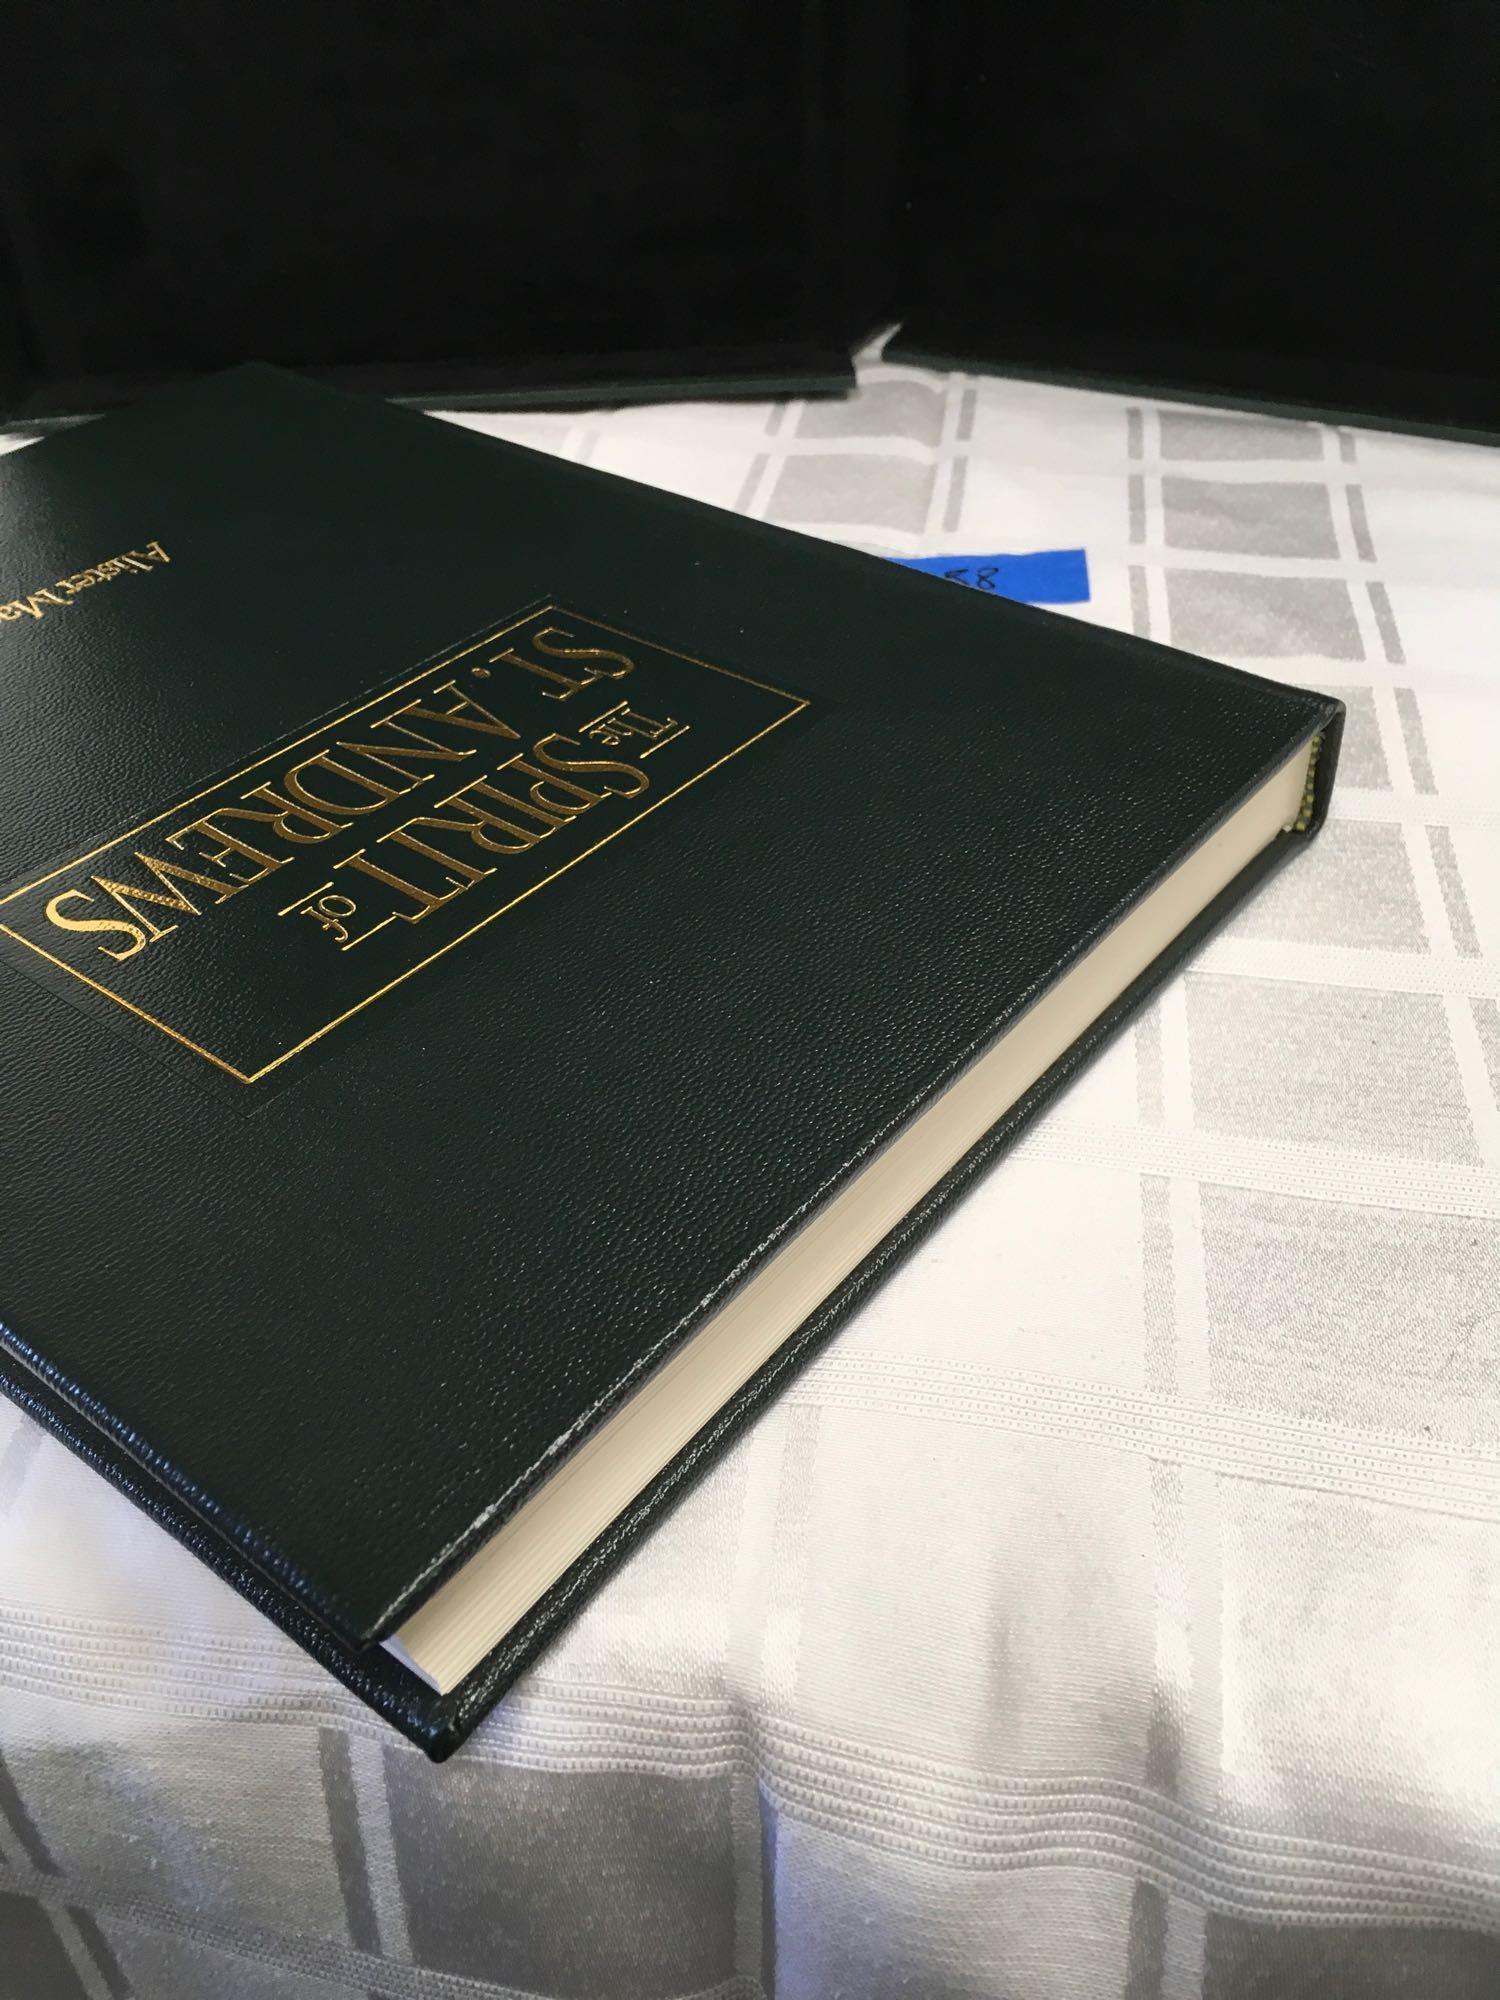 Vintage The Spirits Of St. Andrews, Alister MacKenzie. Book with case. Limited Edition 74 of 1500.